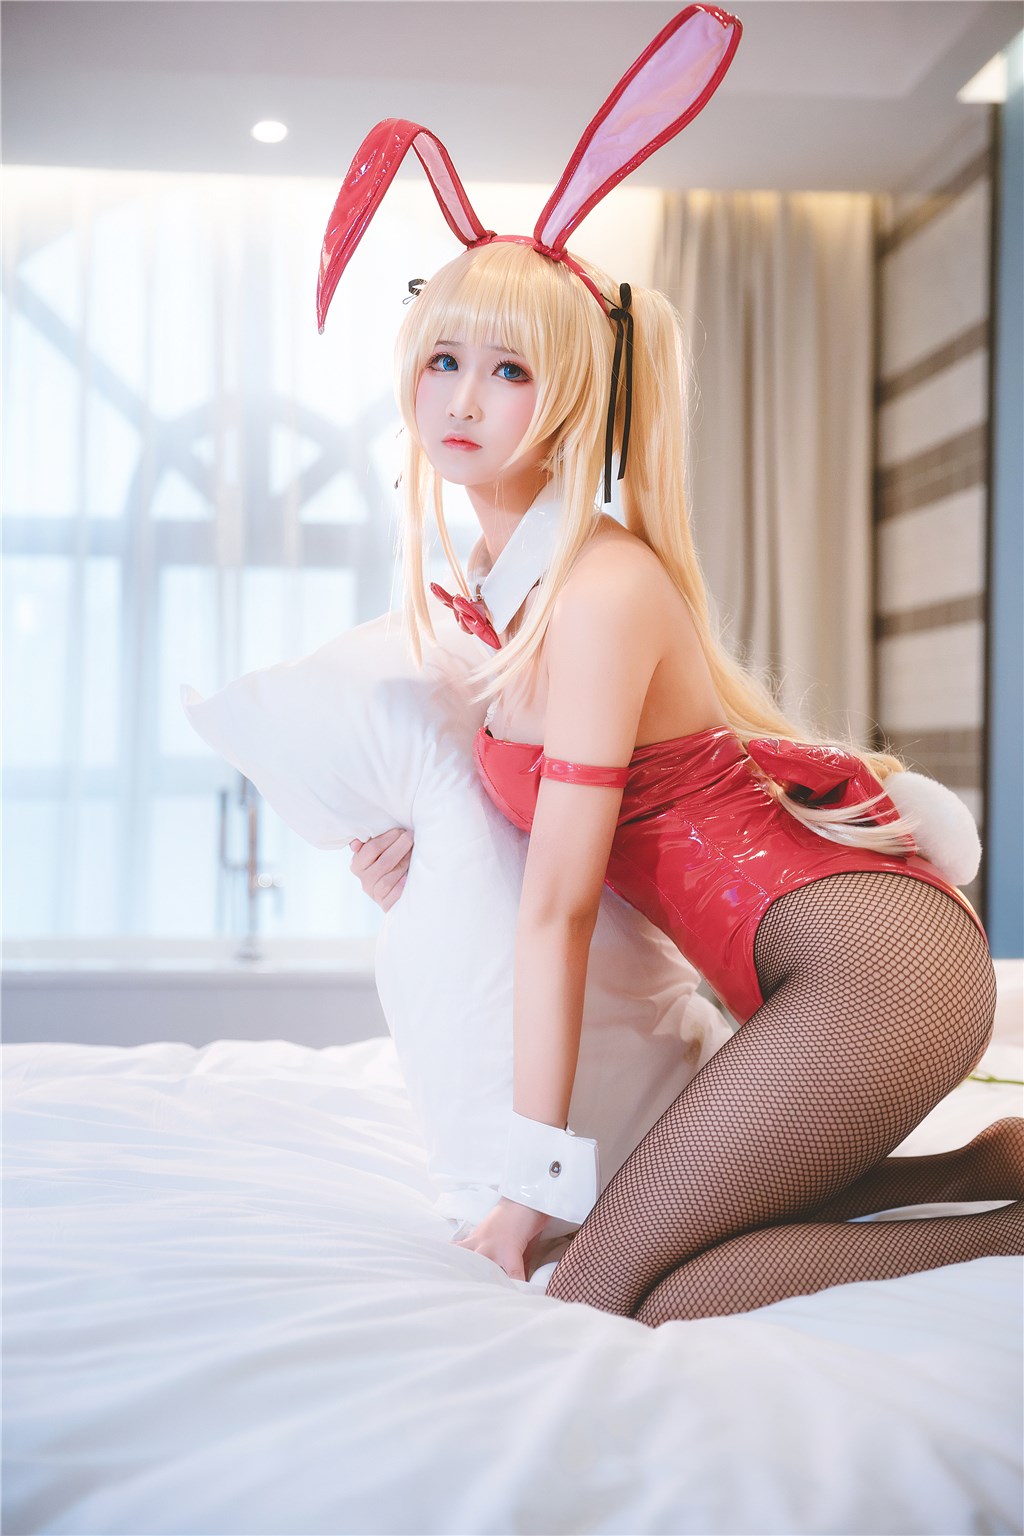 Rabbit playing with pictures 1386 - rabbit girl Vol.31 - Aojiao(40)